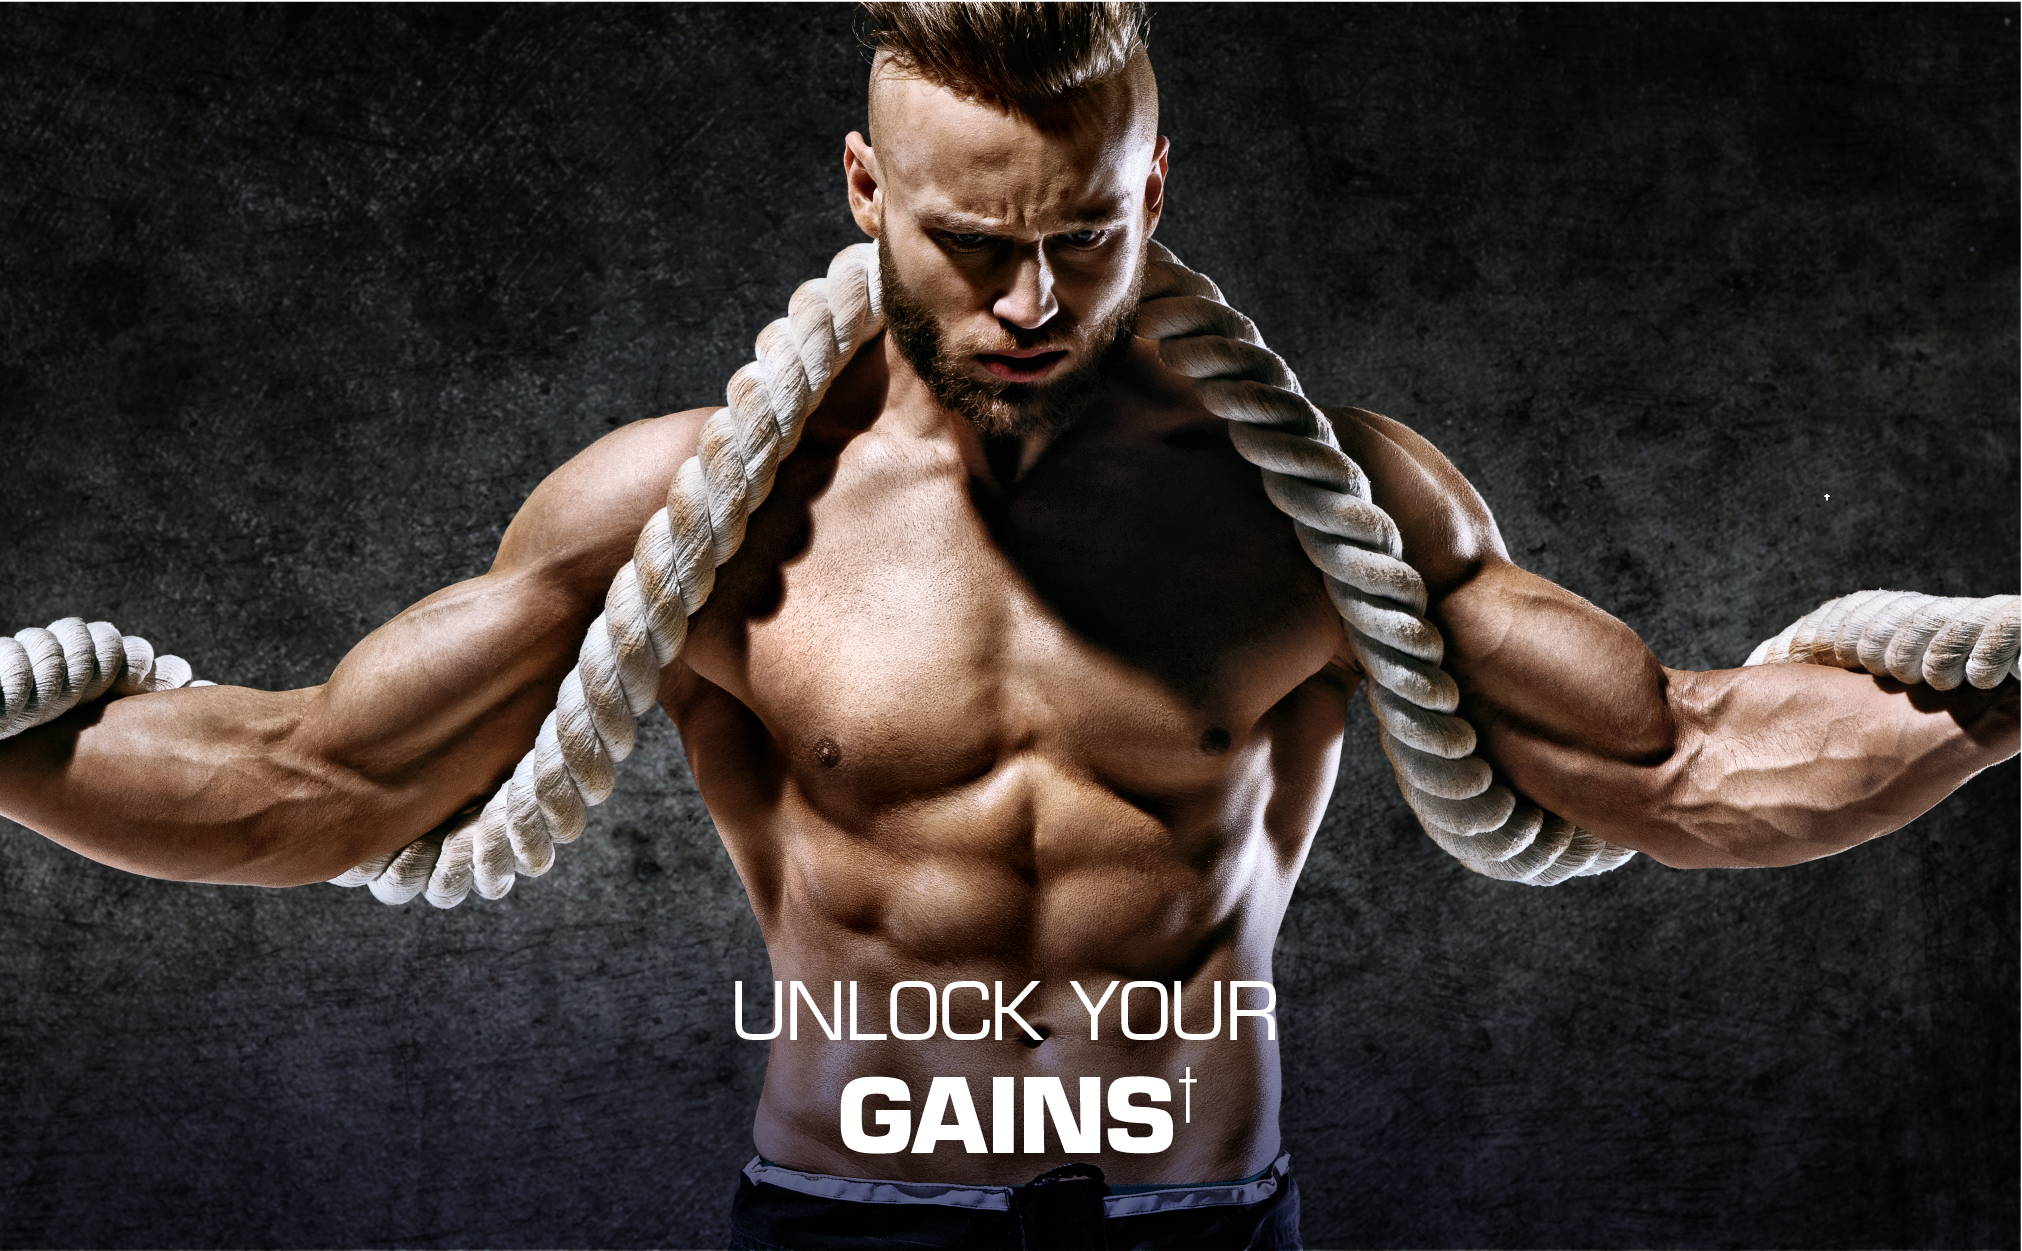 Unlock you gains - muscular guy training with ropes